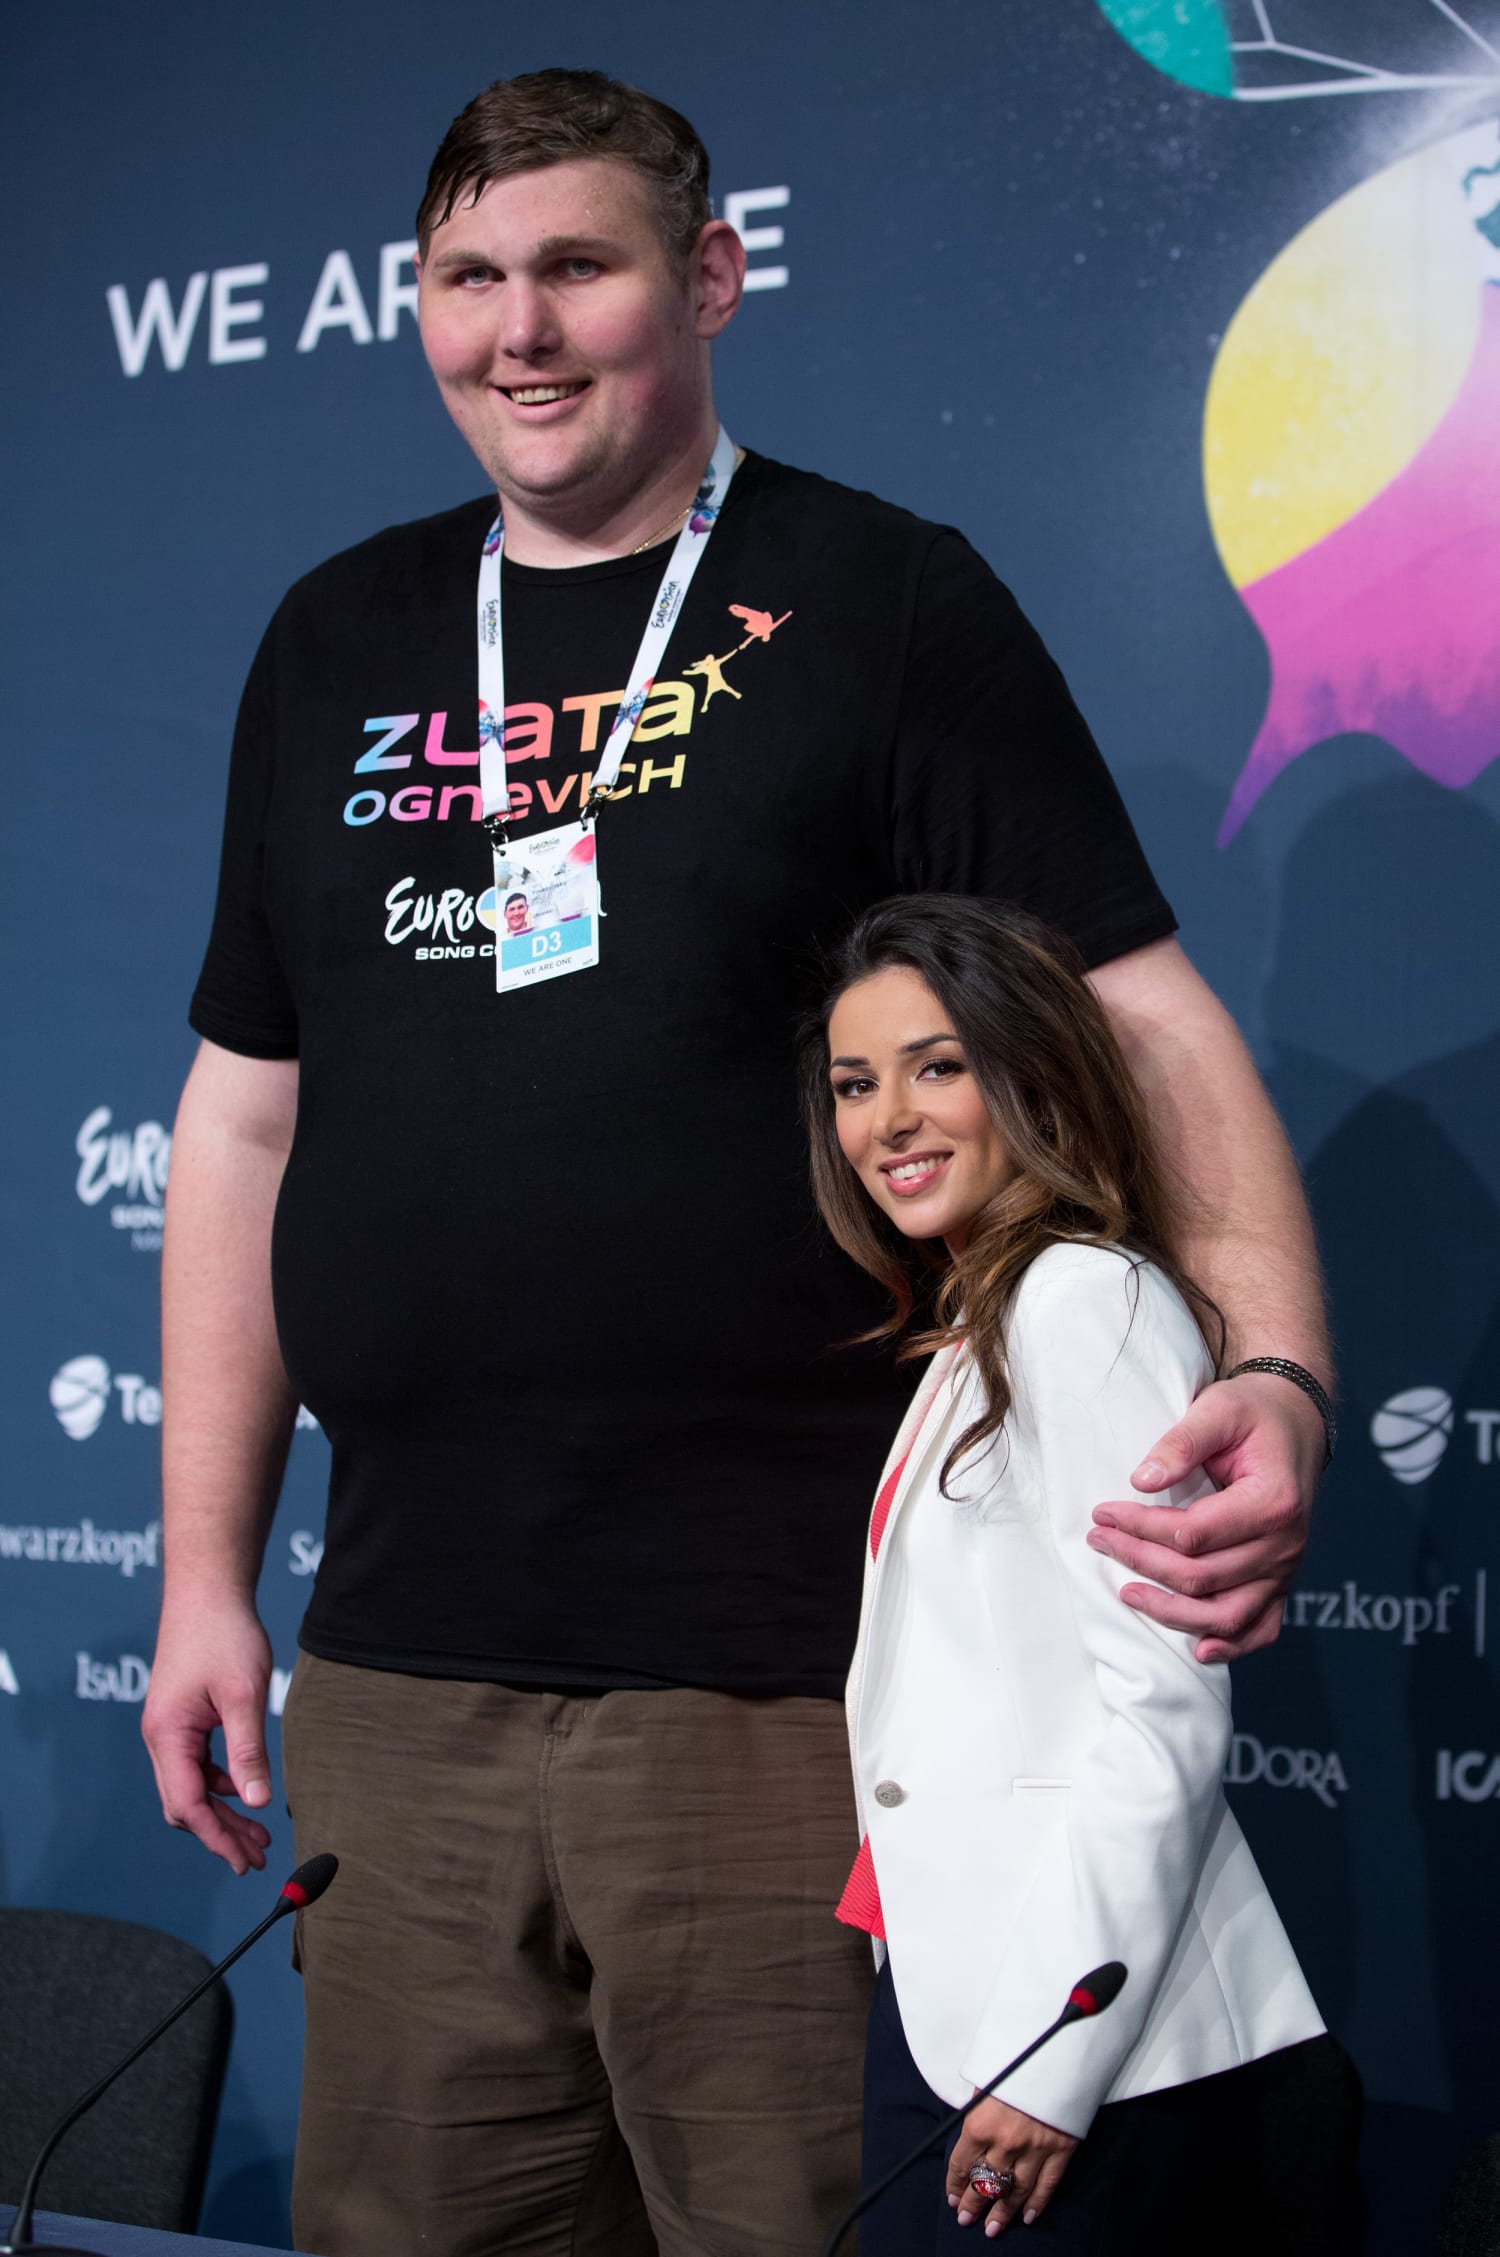 the tallest person in the world